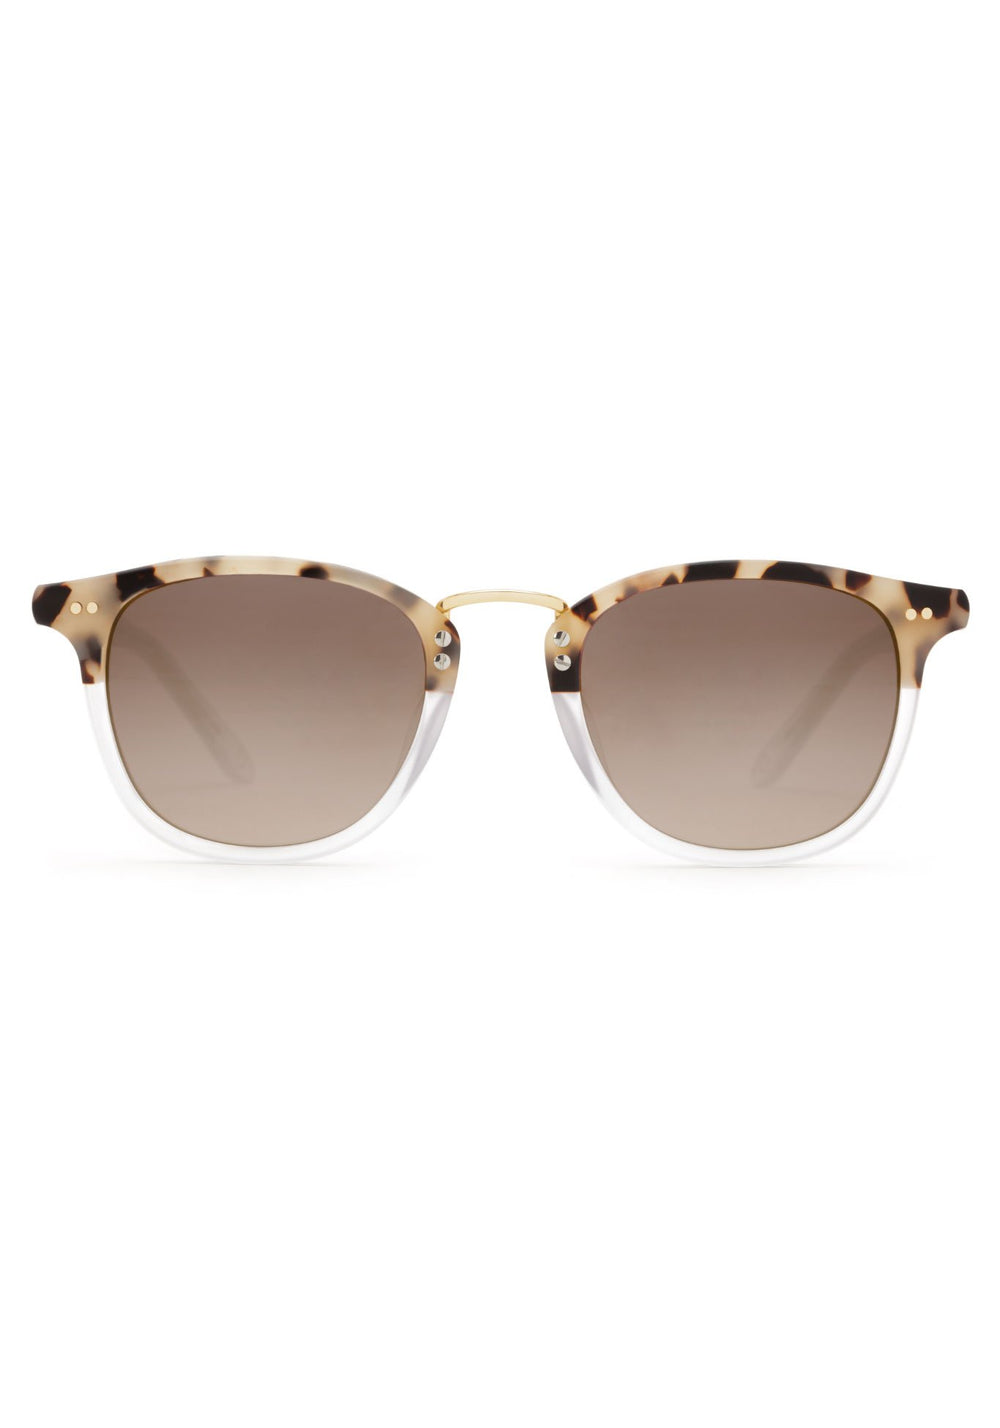 FRANKLIN | Matte Oyster to Crystal 24K Mirrored Handcrafted, luxury tortoise shell acetate KREWE sunglasses